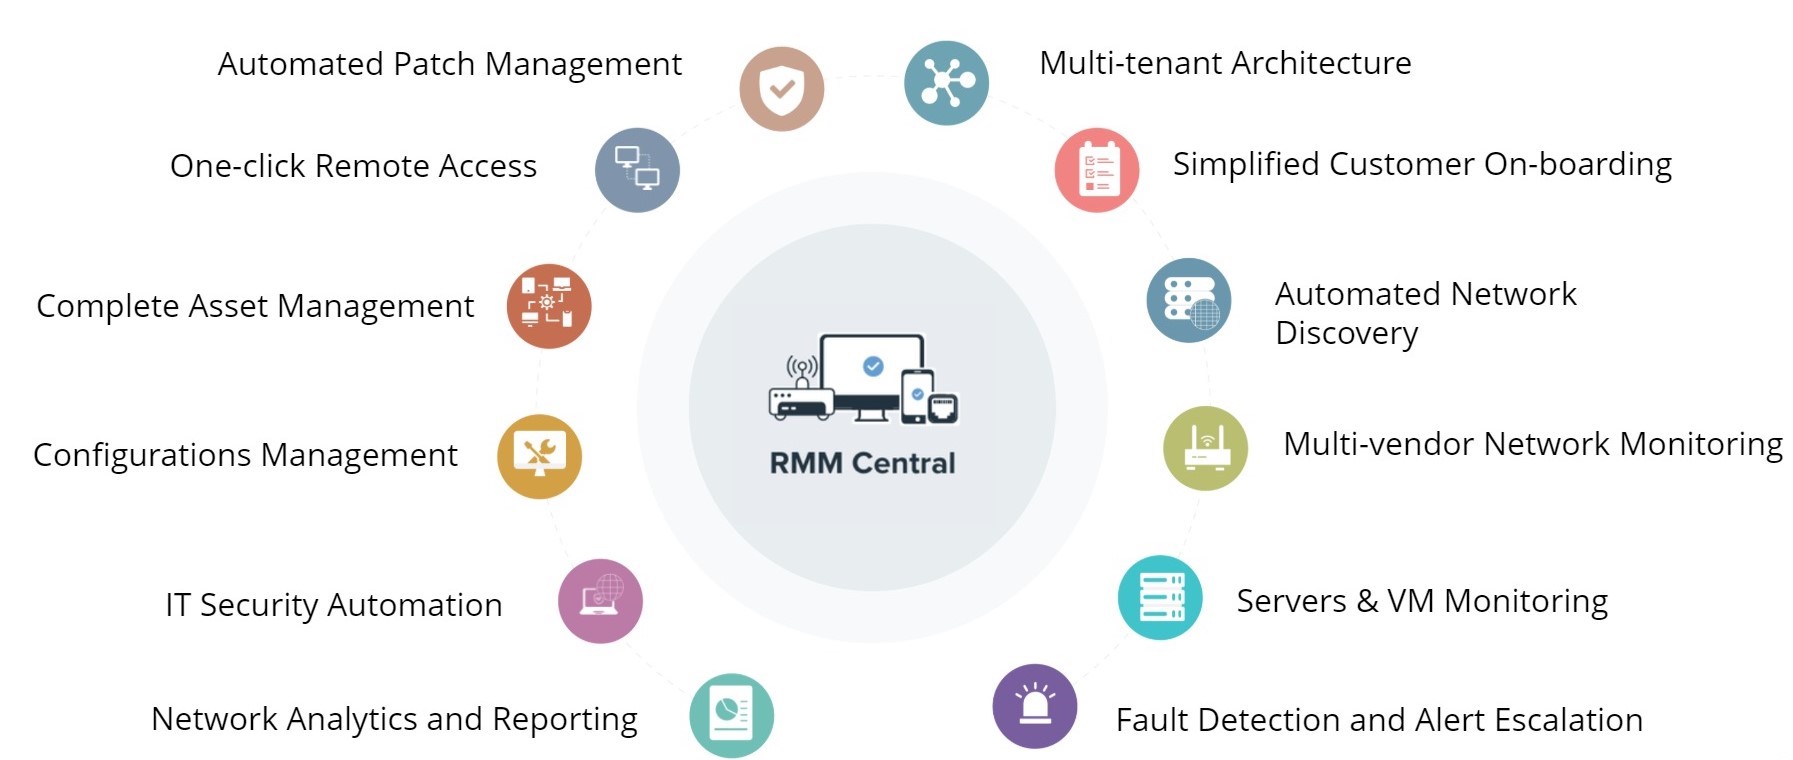 RMM Meaning & Benefits - ManageEngine RMM Central